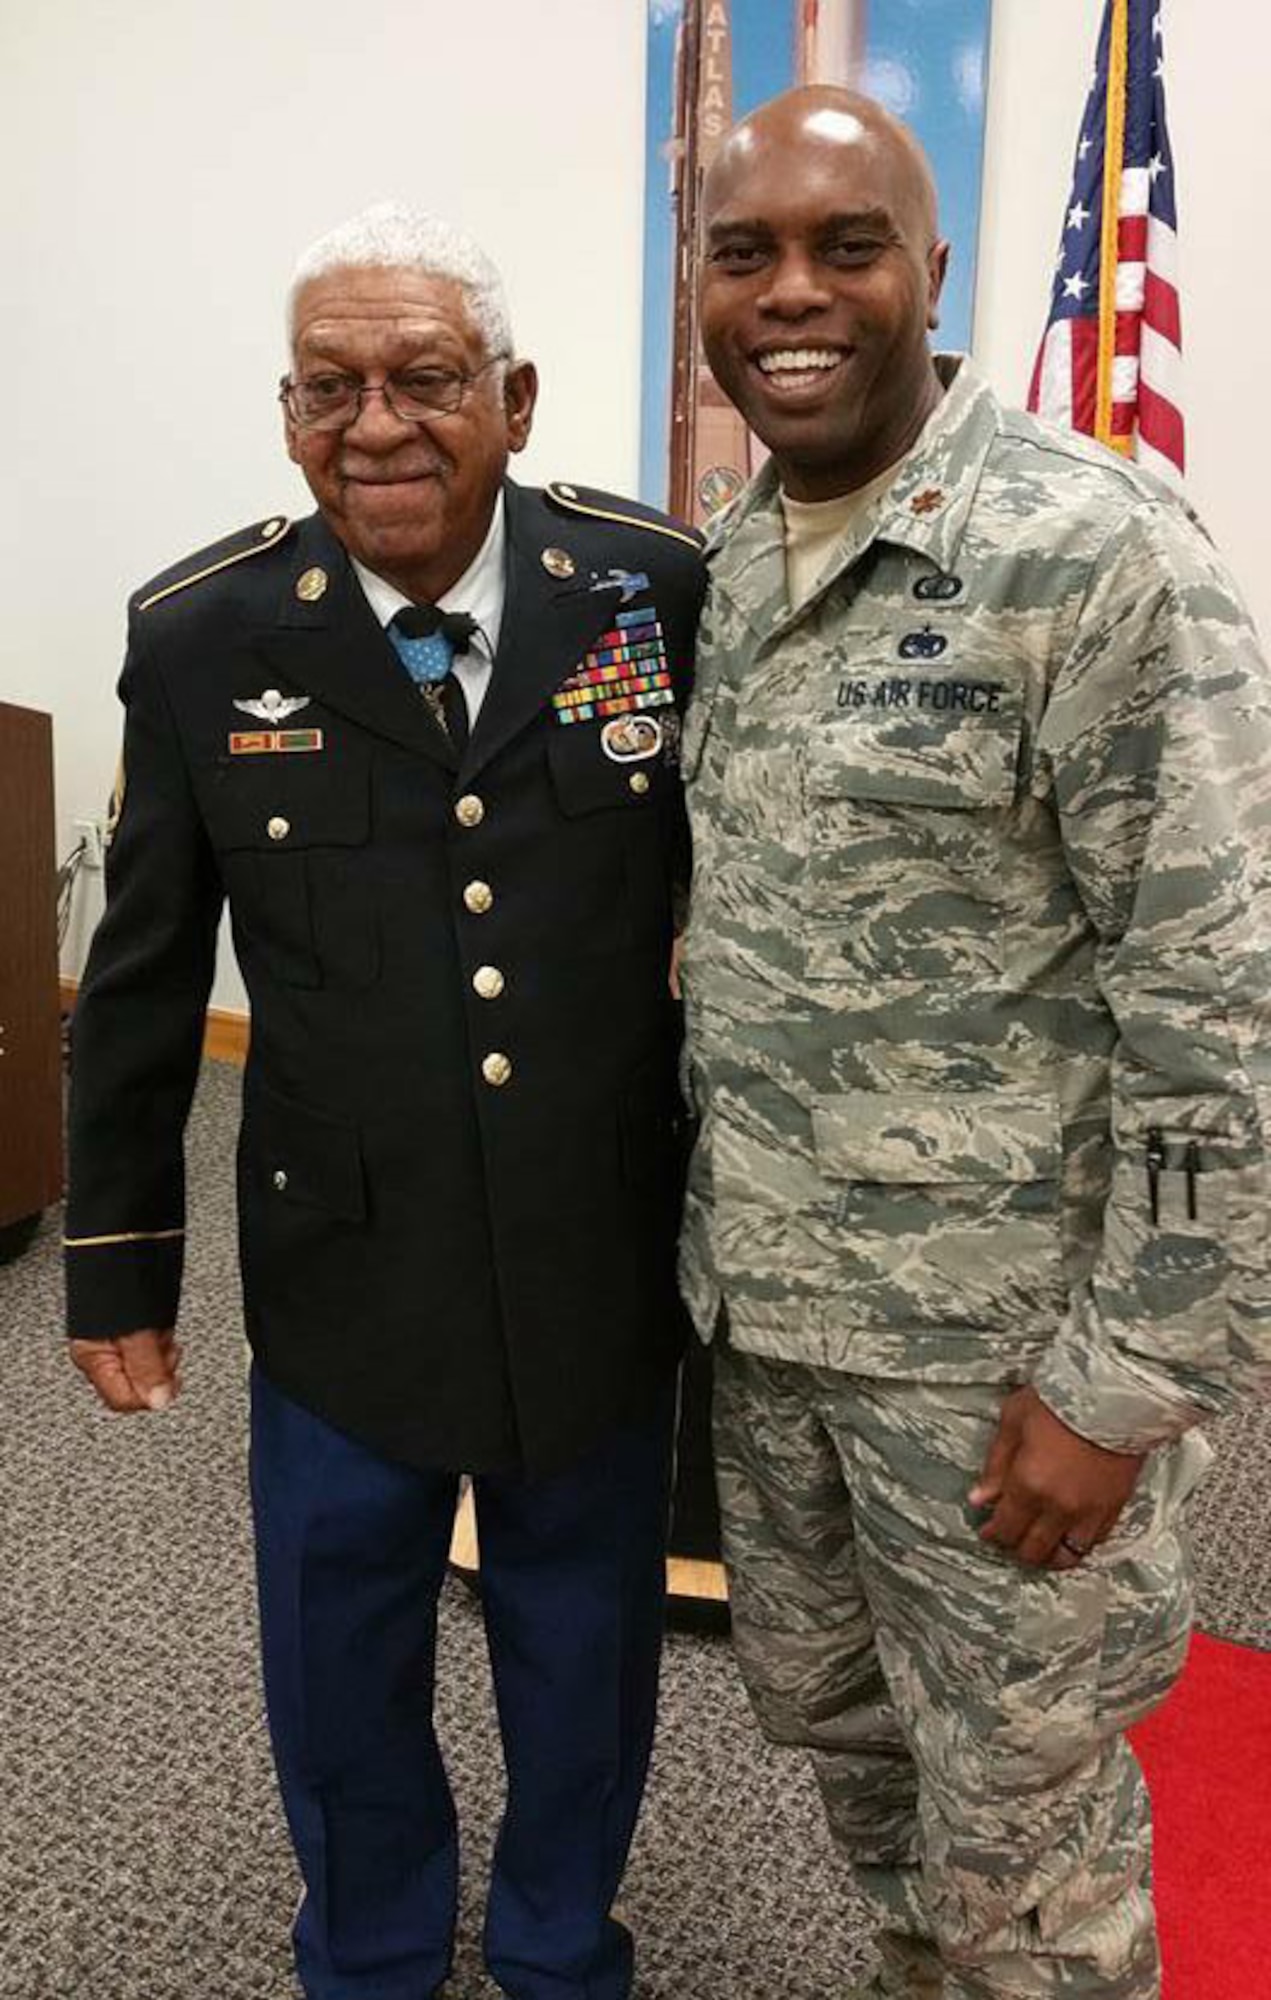 Medal of Honor recipient retired U.S. Army Sgt. 1st Class Melvin Morris coined Maj. Marcus Smith, 308th Rescue Squadron, Patrick Air Force Base, Fla., Jan. 31, 2017. During a visit to PAFB, Morris gave a presentation emphasizing the importance of pushing through adversity because "we are trained and trusted to always get the job done regardless of our circumstances." (Courtesy photo)